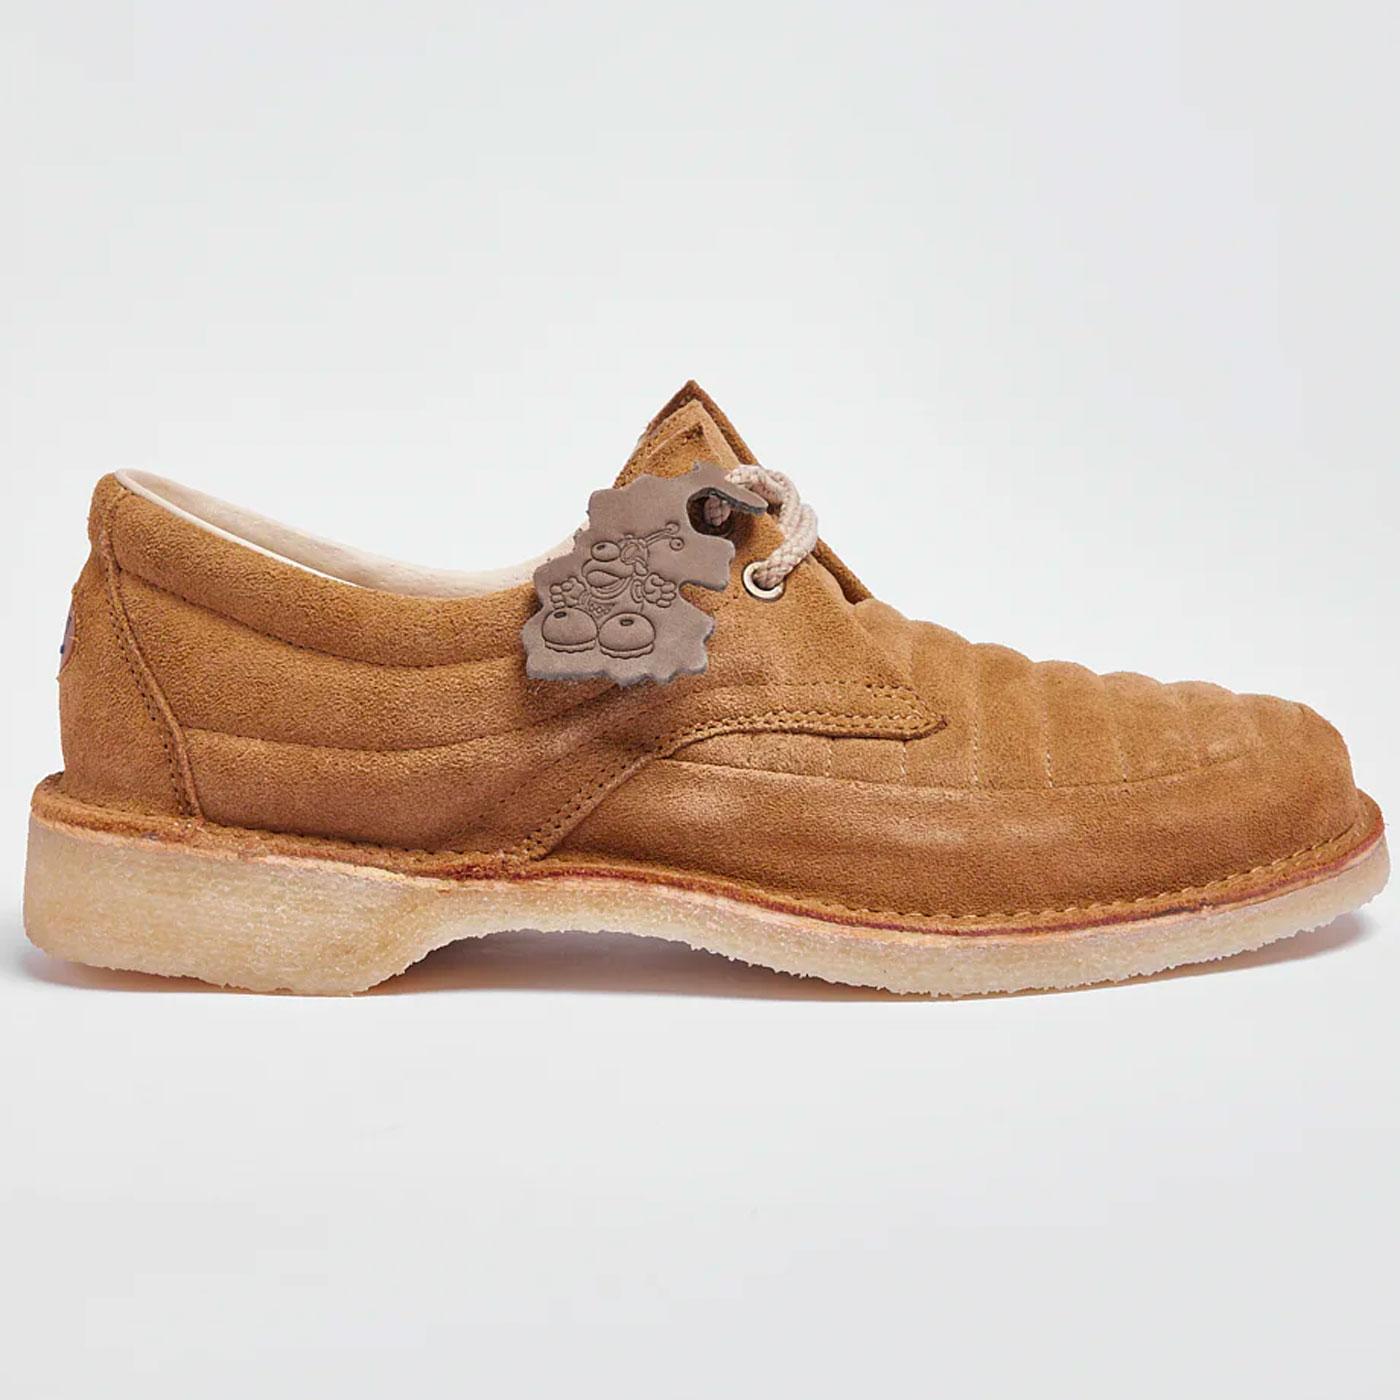 Jagger POD ORIGINAL Retro Suede Quilted Shoes T